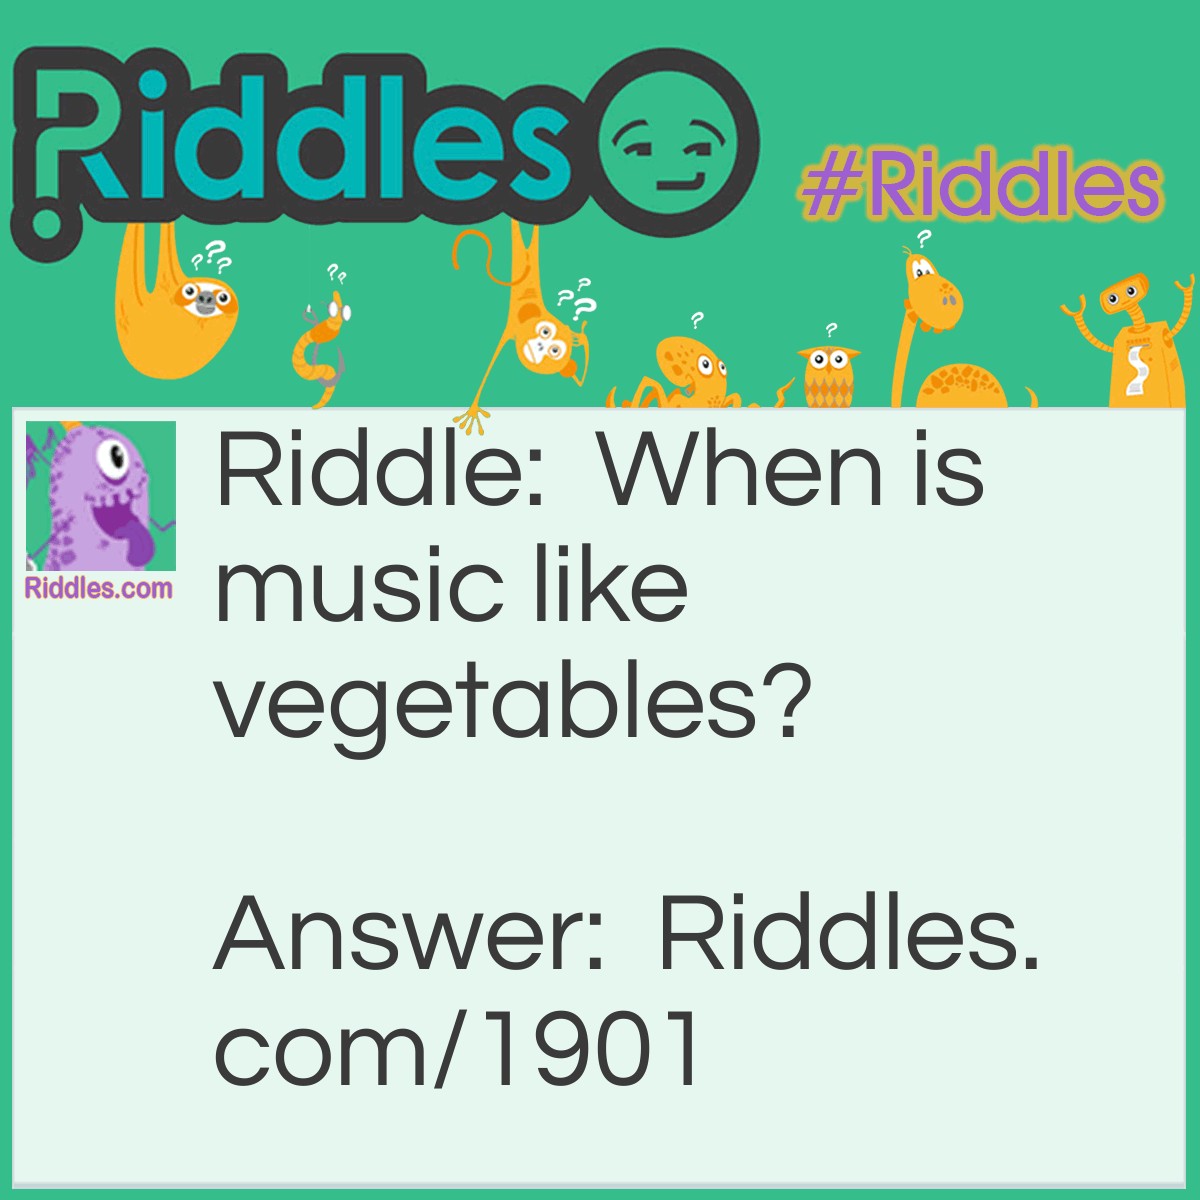 Riddle: When is music like vegetables? Answer: When there are two beats (beets) to the measure.